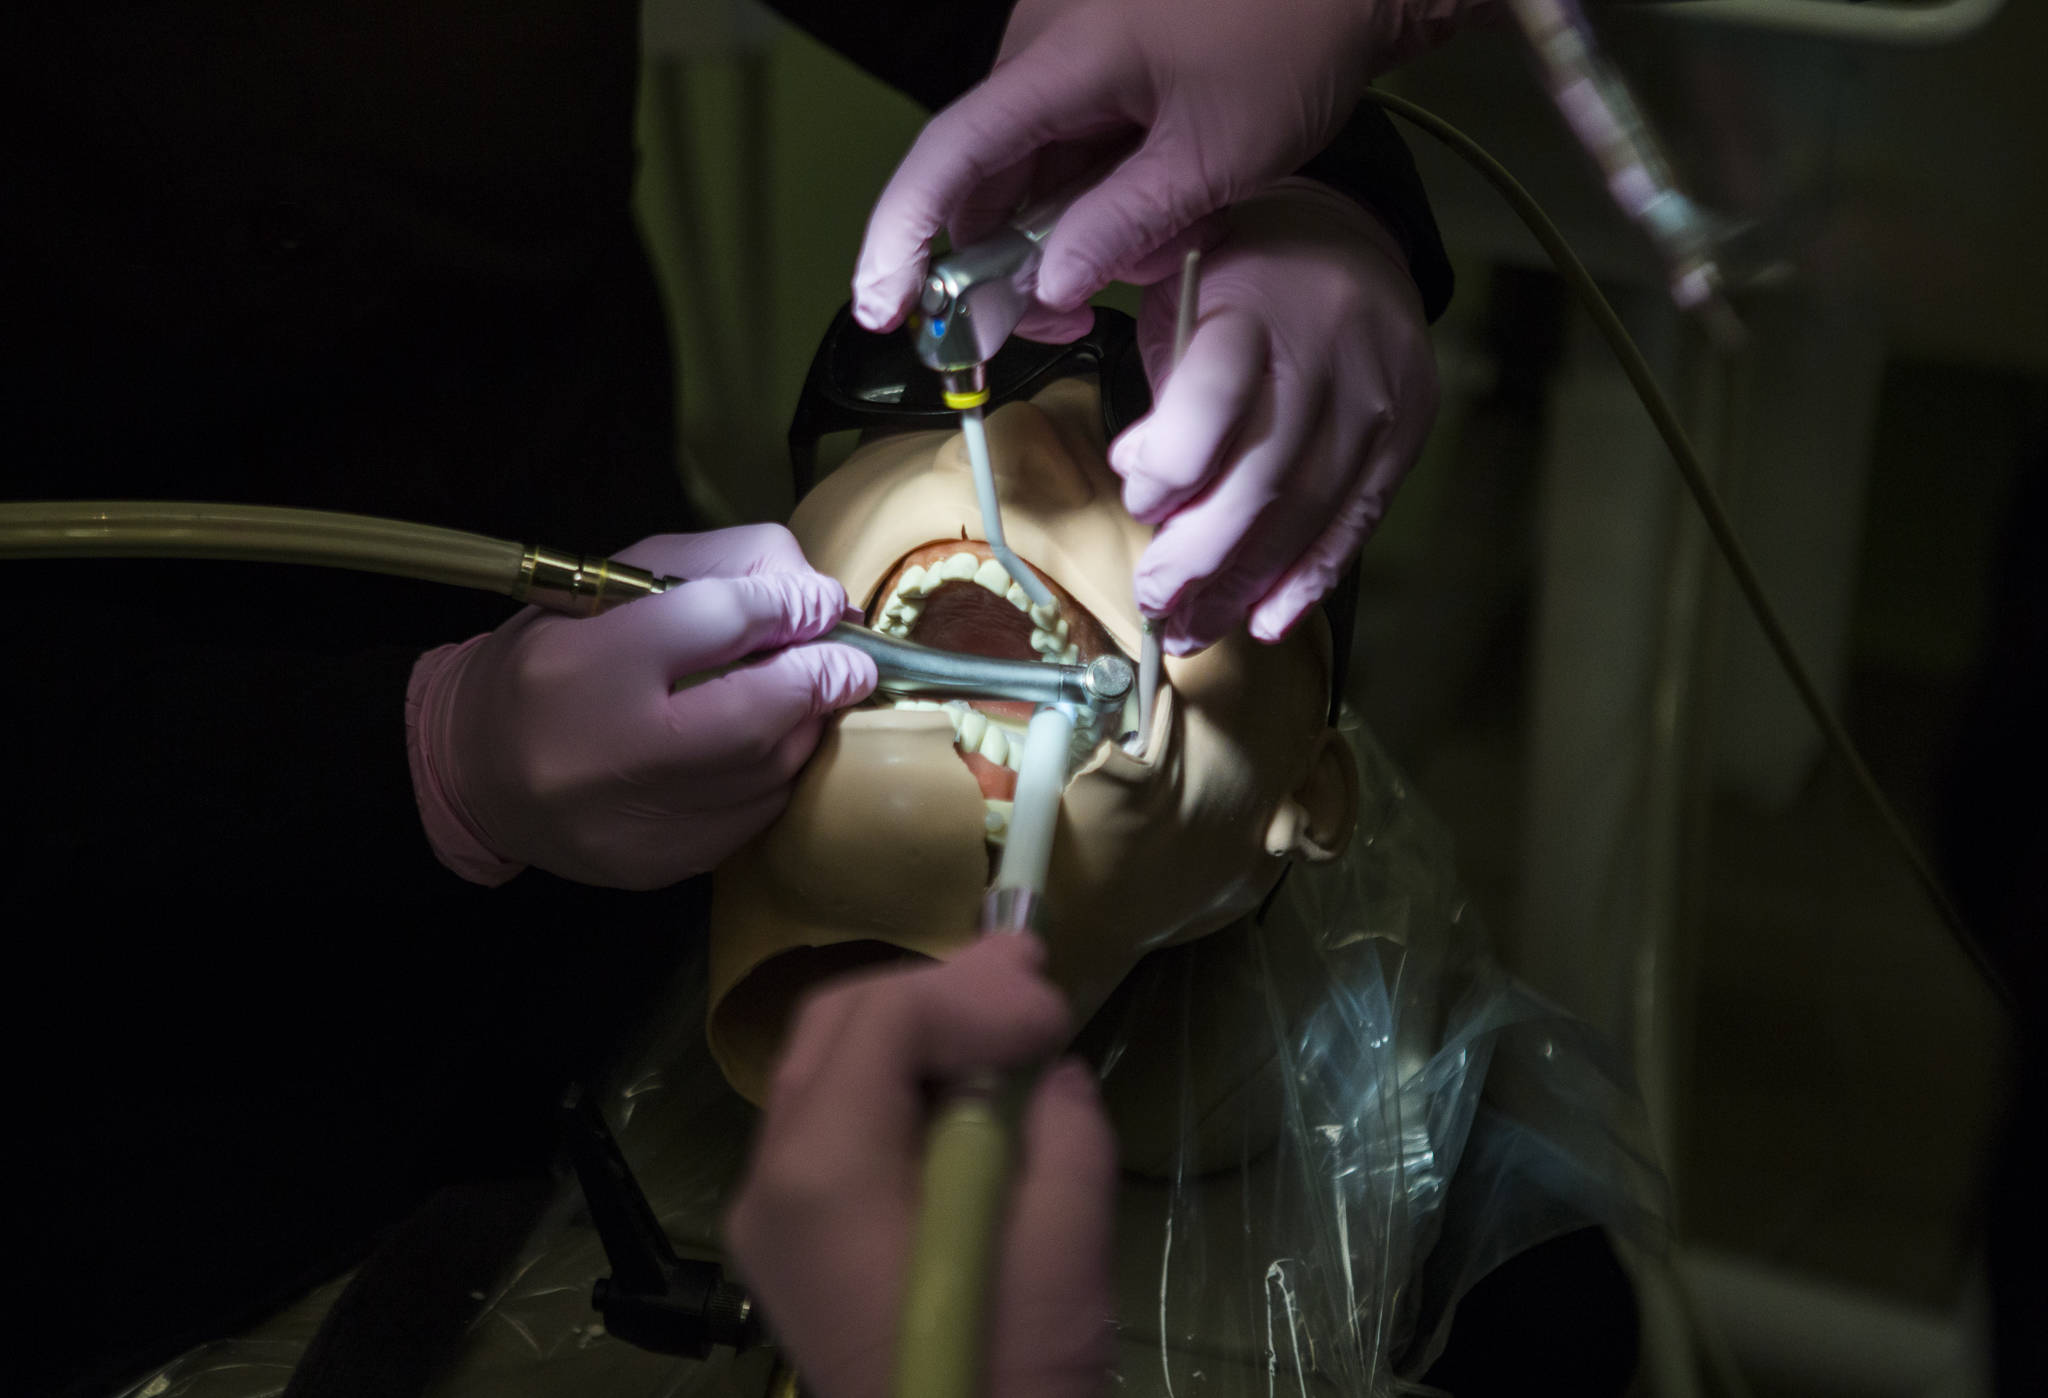 Students and instructors work on a crown prep exercise at Northshore Dental Assisting Academy on April 9 in Everett. (Olivia Vanni / The Herald)